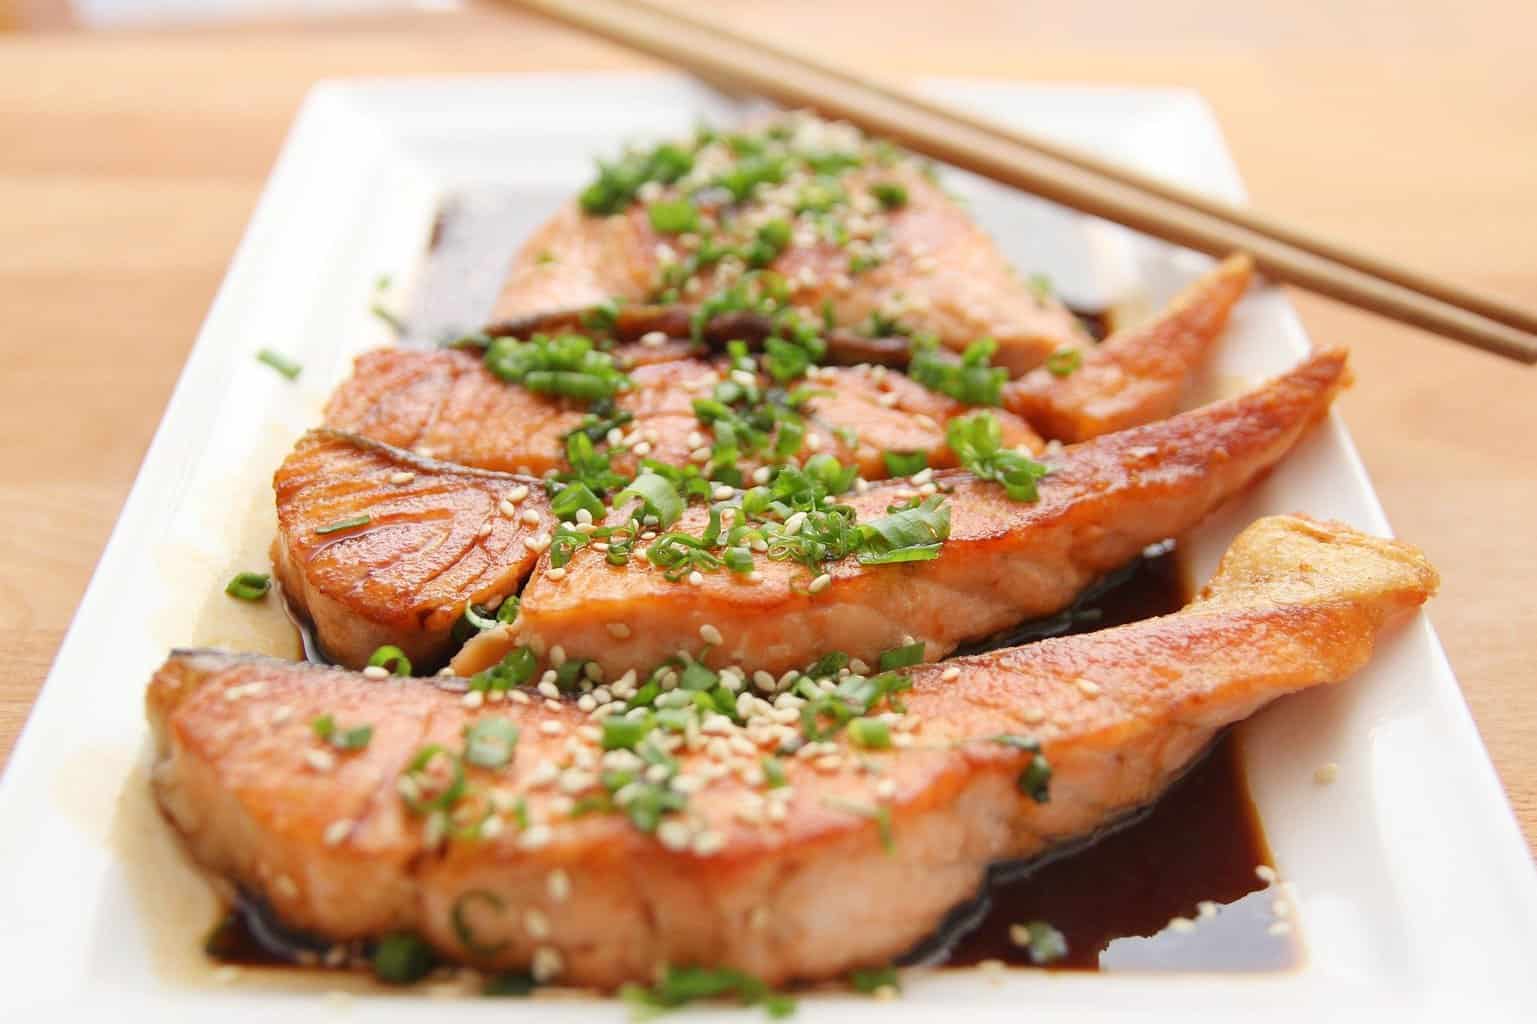 Salmon for the Take: A Delicious Fatty Fish for Weight Loss